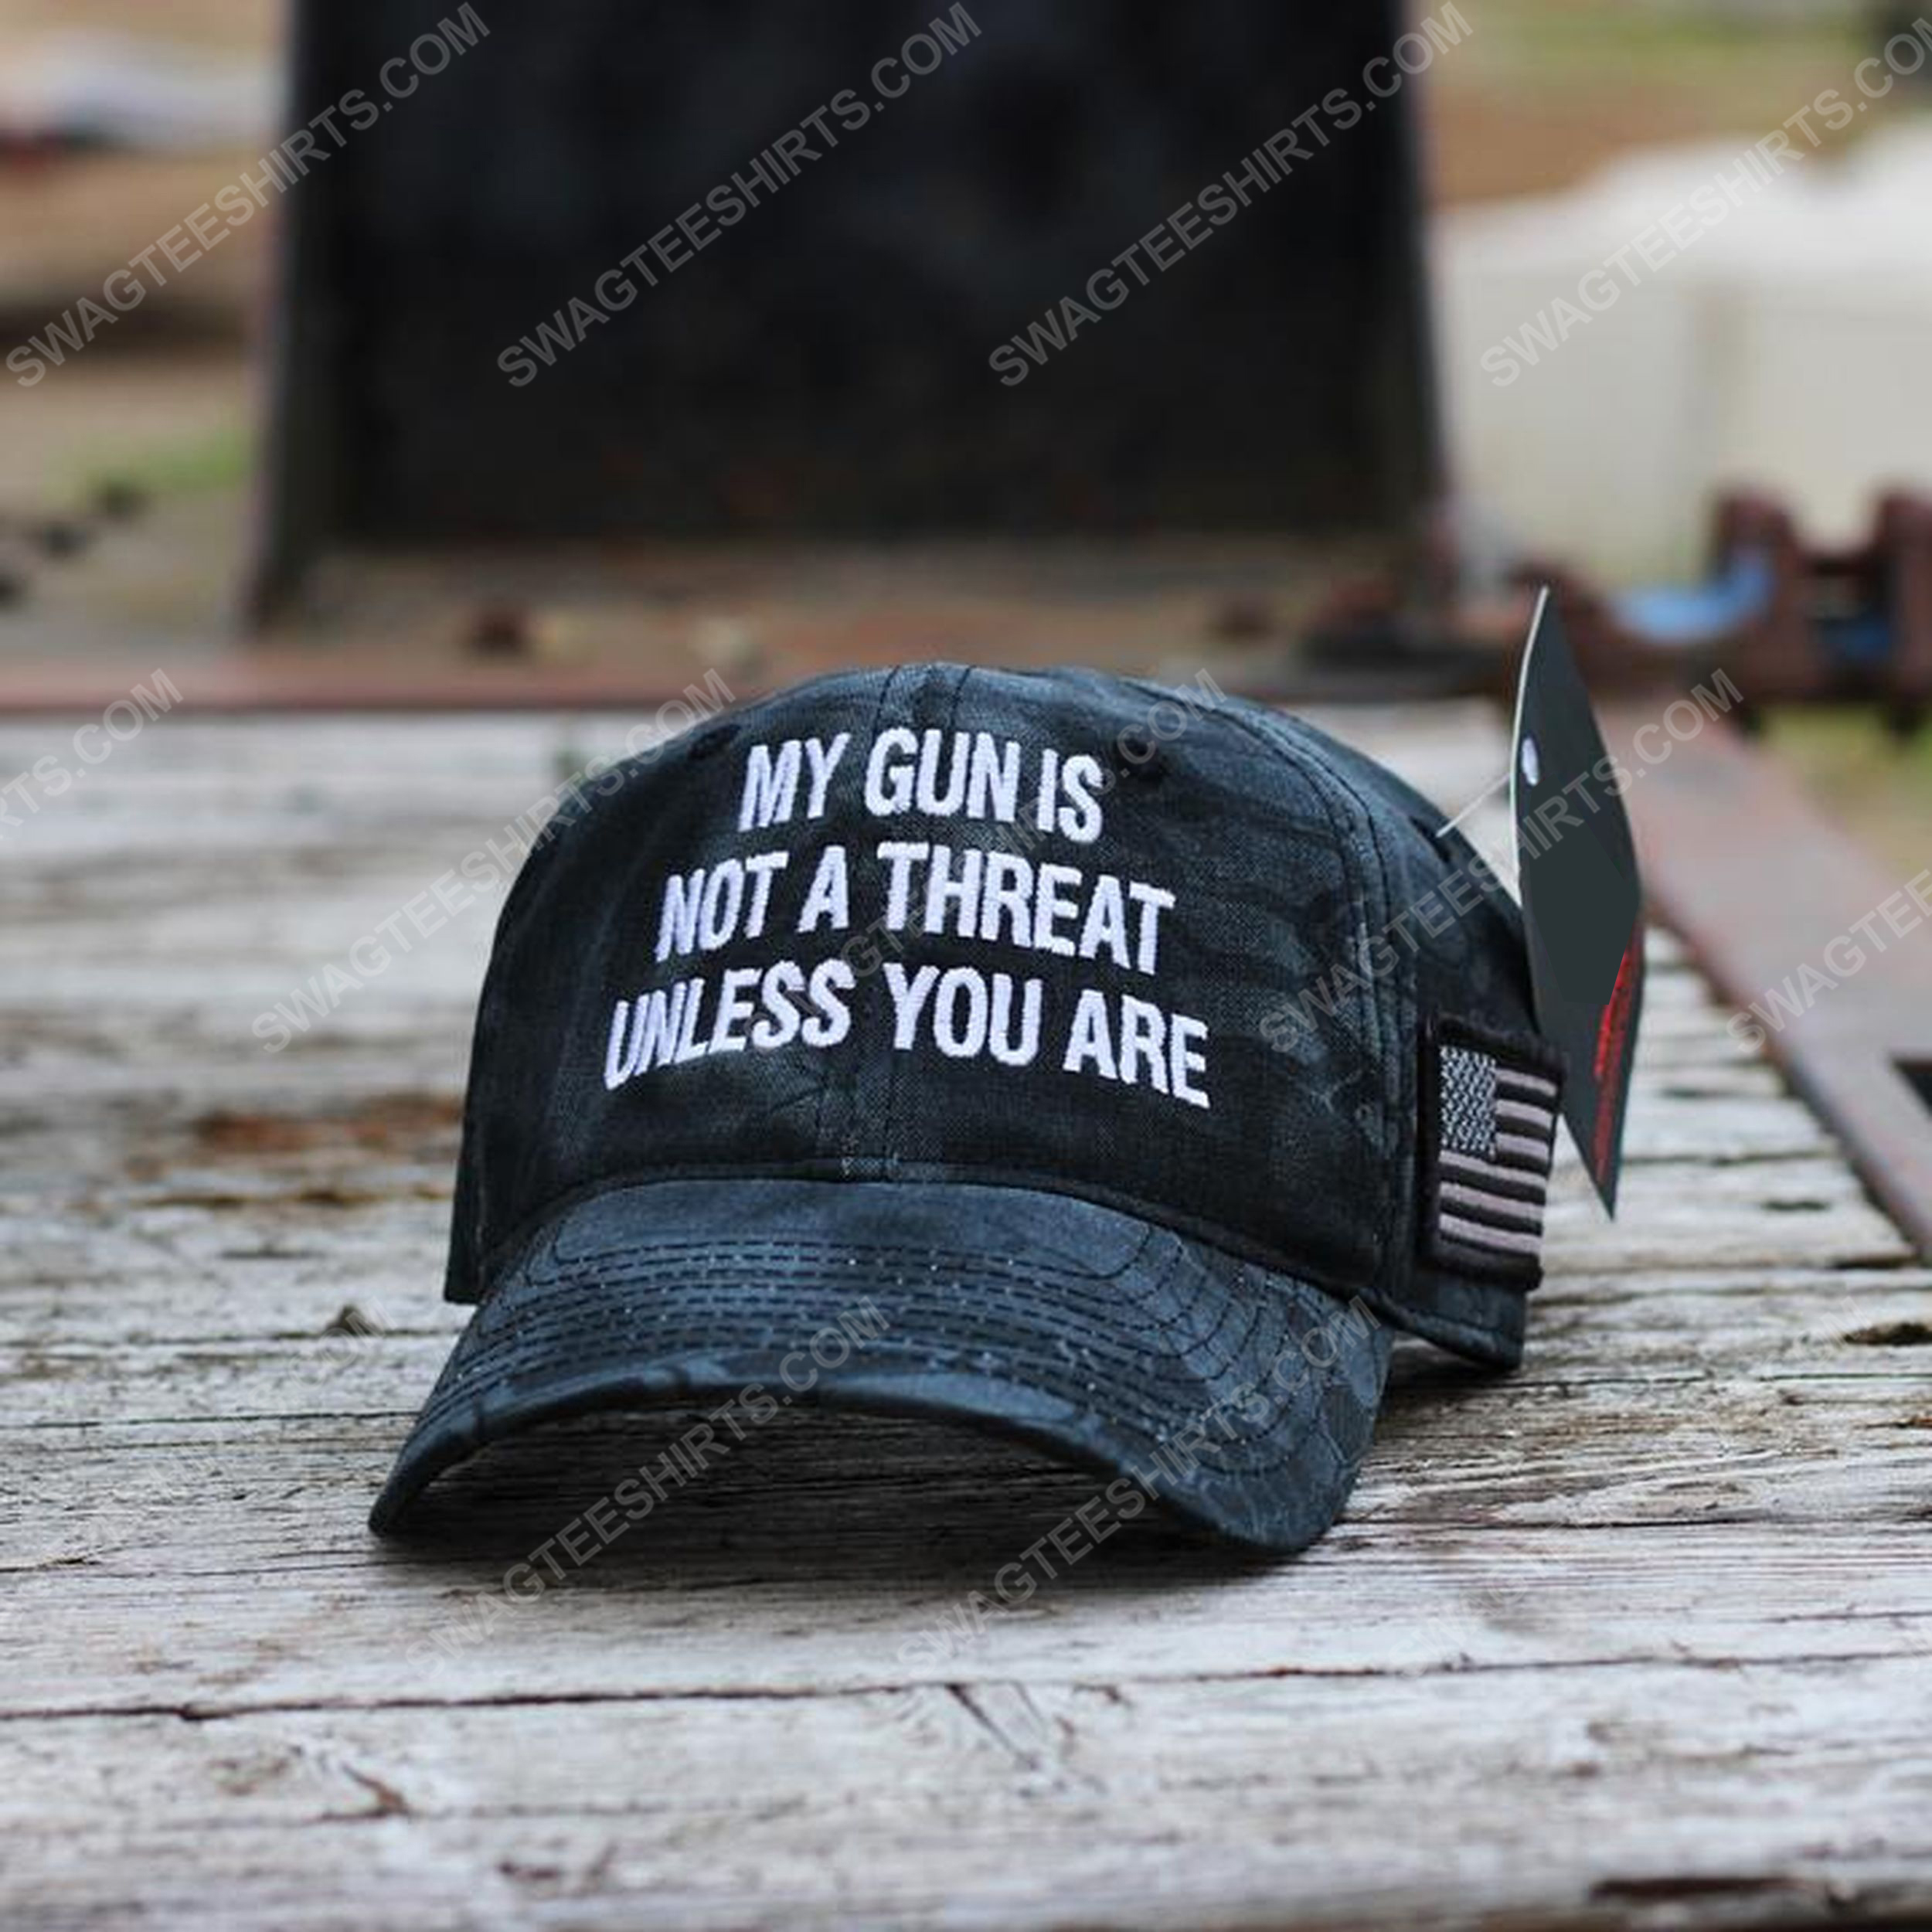 My gun is not a threat unless you are full print classic hat 1 - Copy (2)